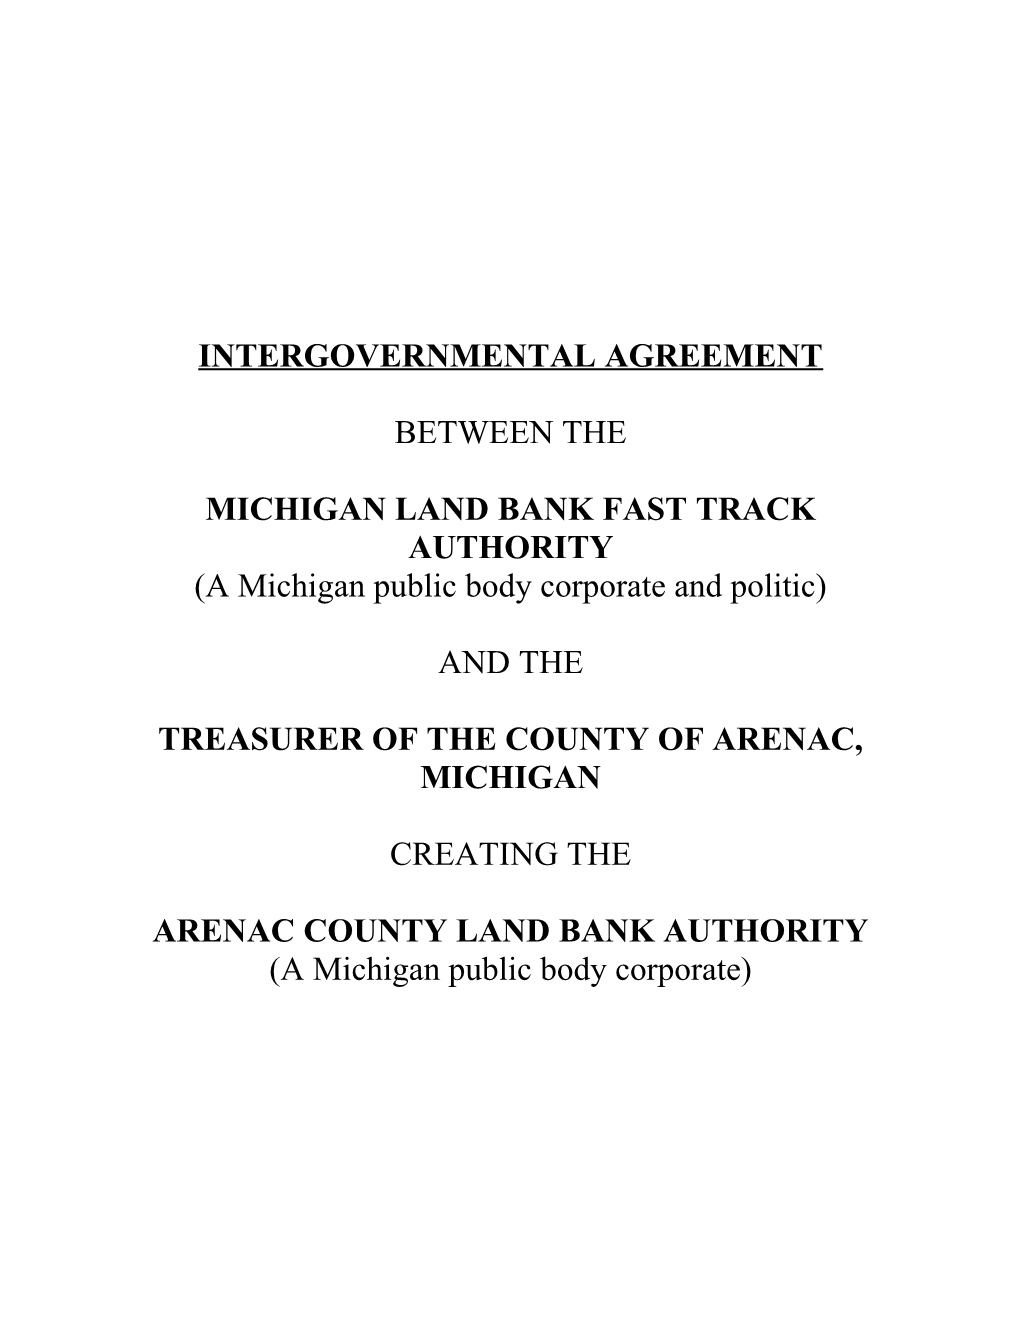 Michigan Land Bank Fast Track Authority